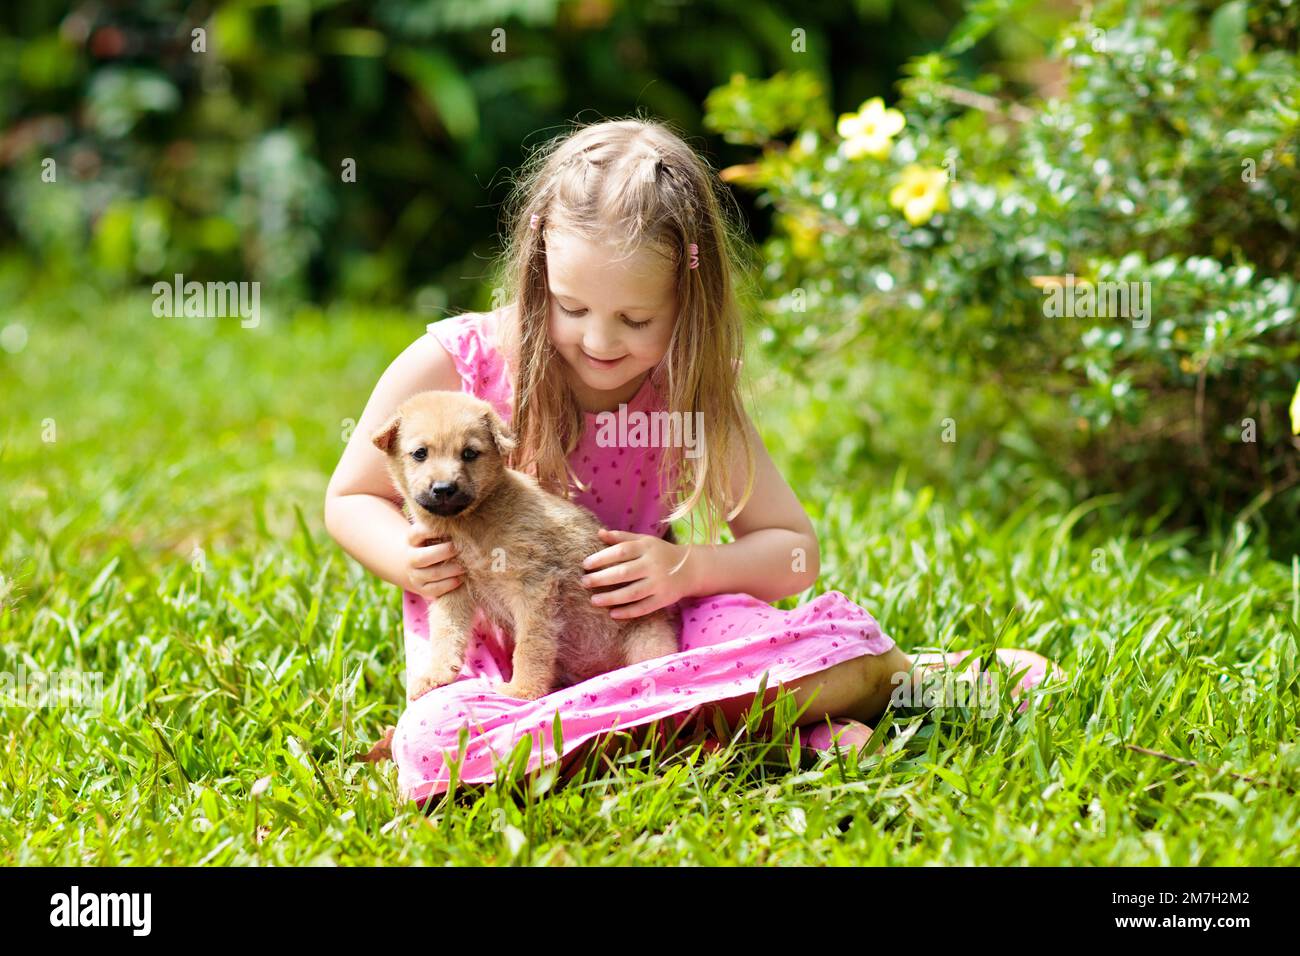 Kids play with cute little puppy. Children and baby dogs playing in sunny summer garden. Little girl holding puppies. Child with pet dog. Stock Photo